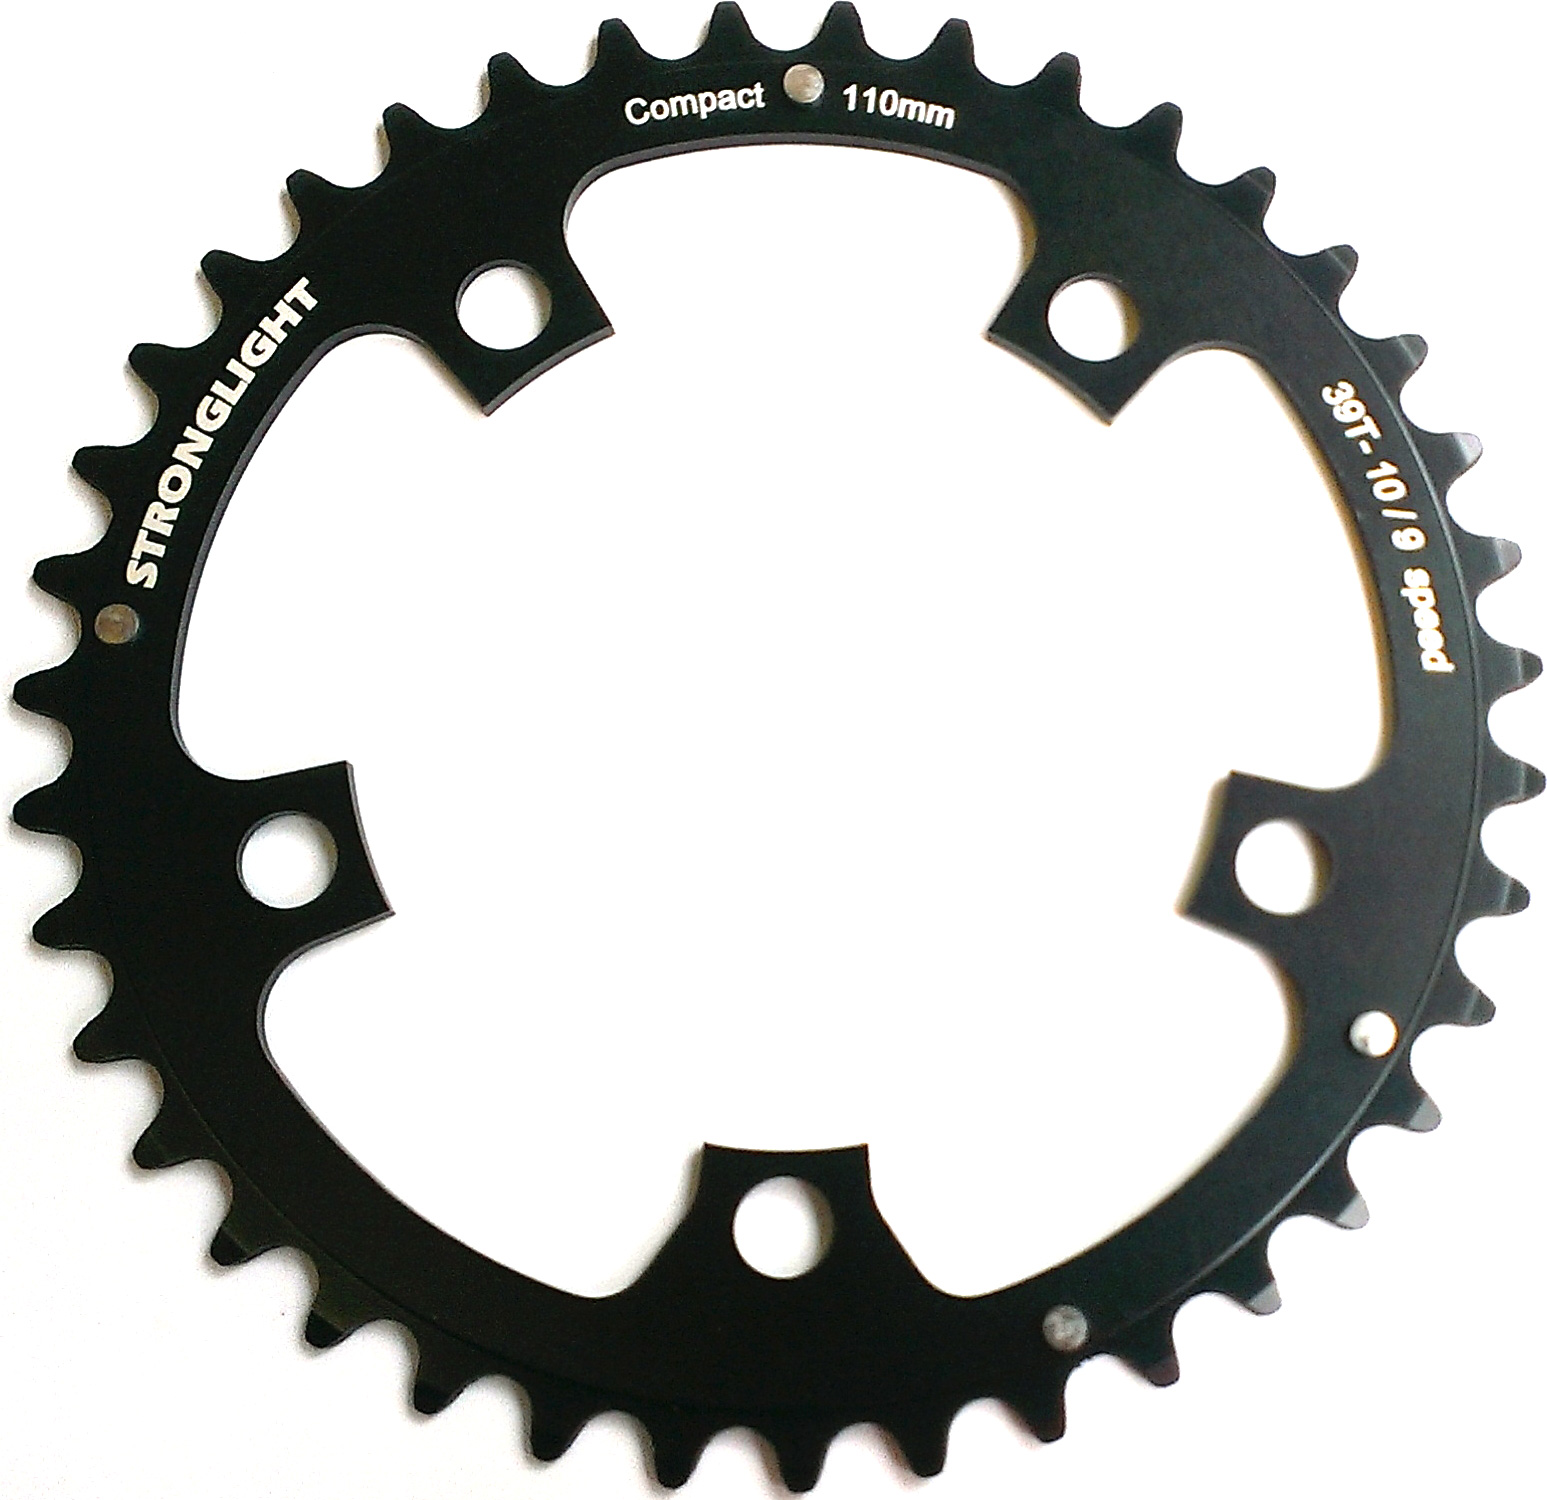 RD11048Z Stronglight 48T Black 5-Arm/110mm Chainring